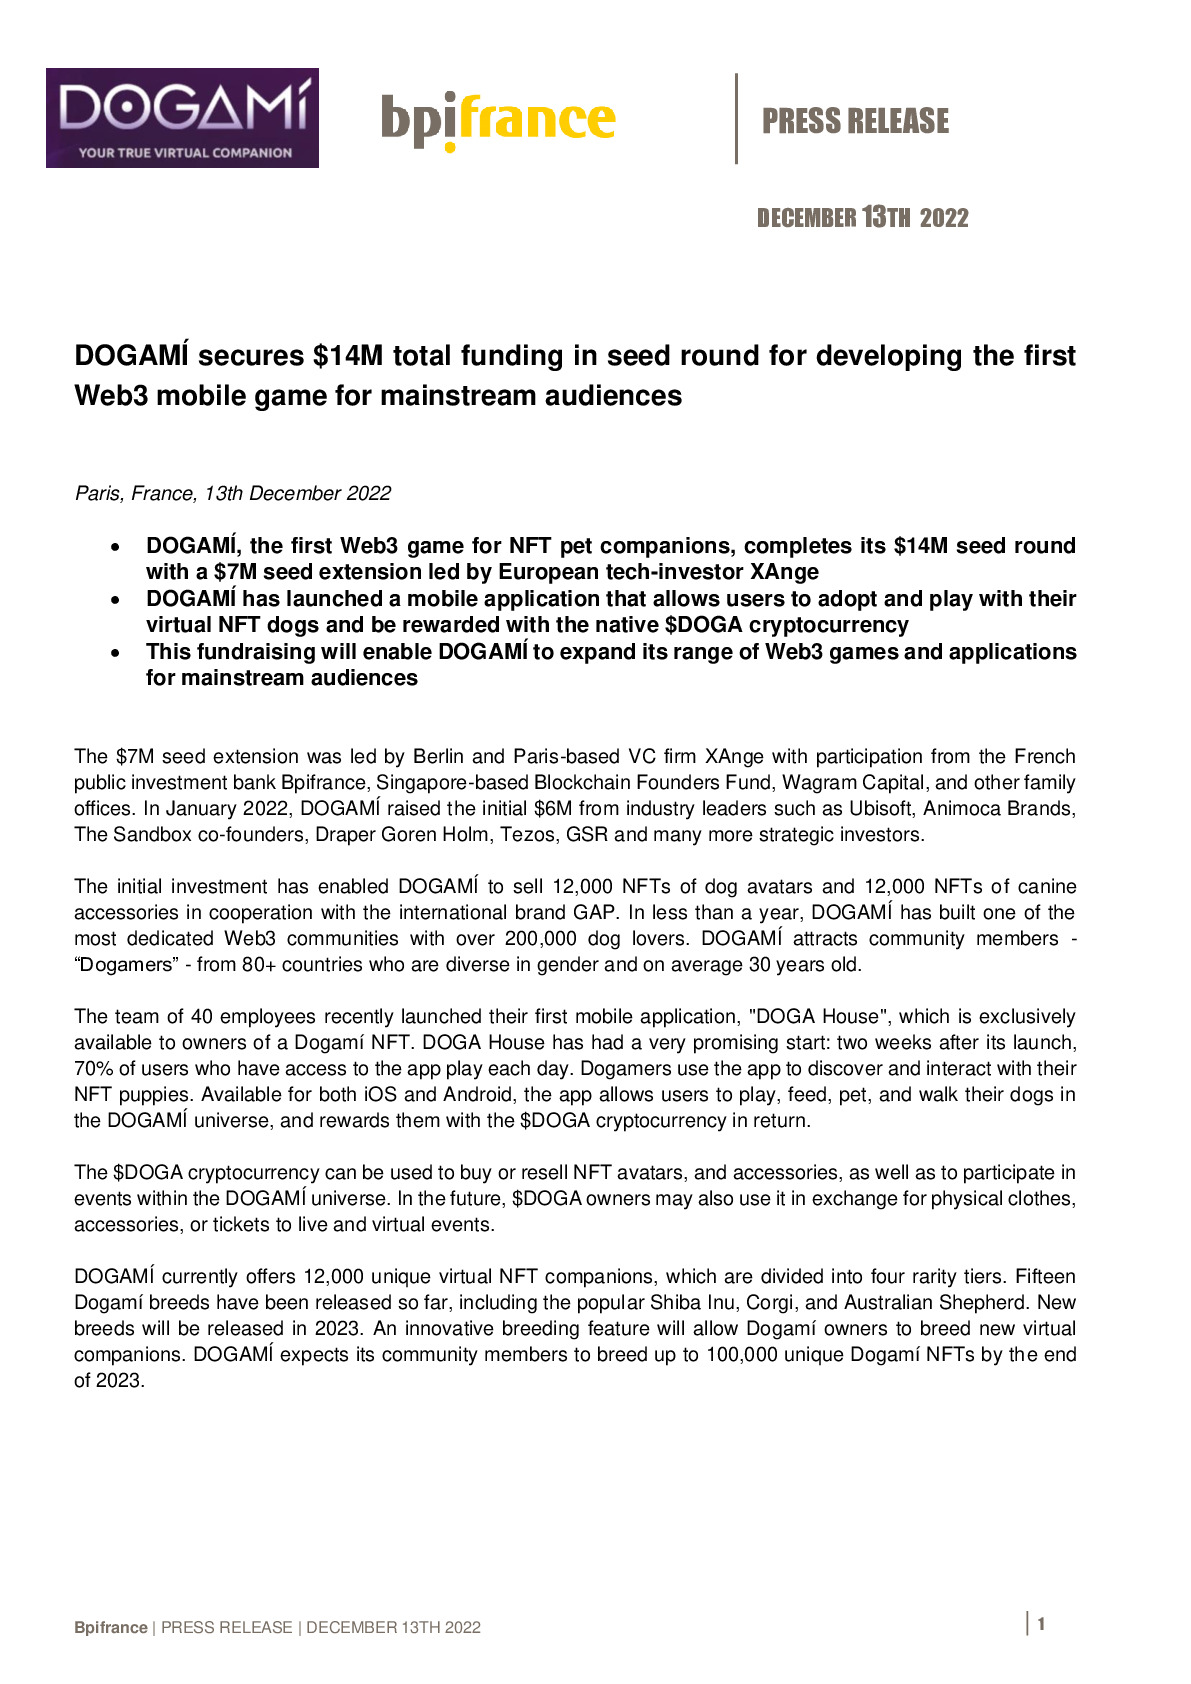 2022 12 13 PR – DOGAMÍ secures 14M total funding in seed round for developing the first Web3 mobile game for mainstream audiences.pdf